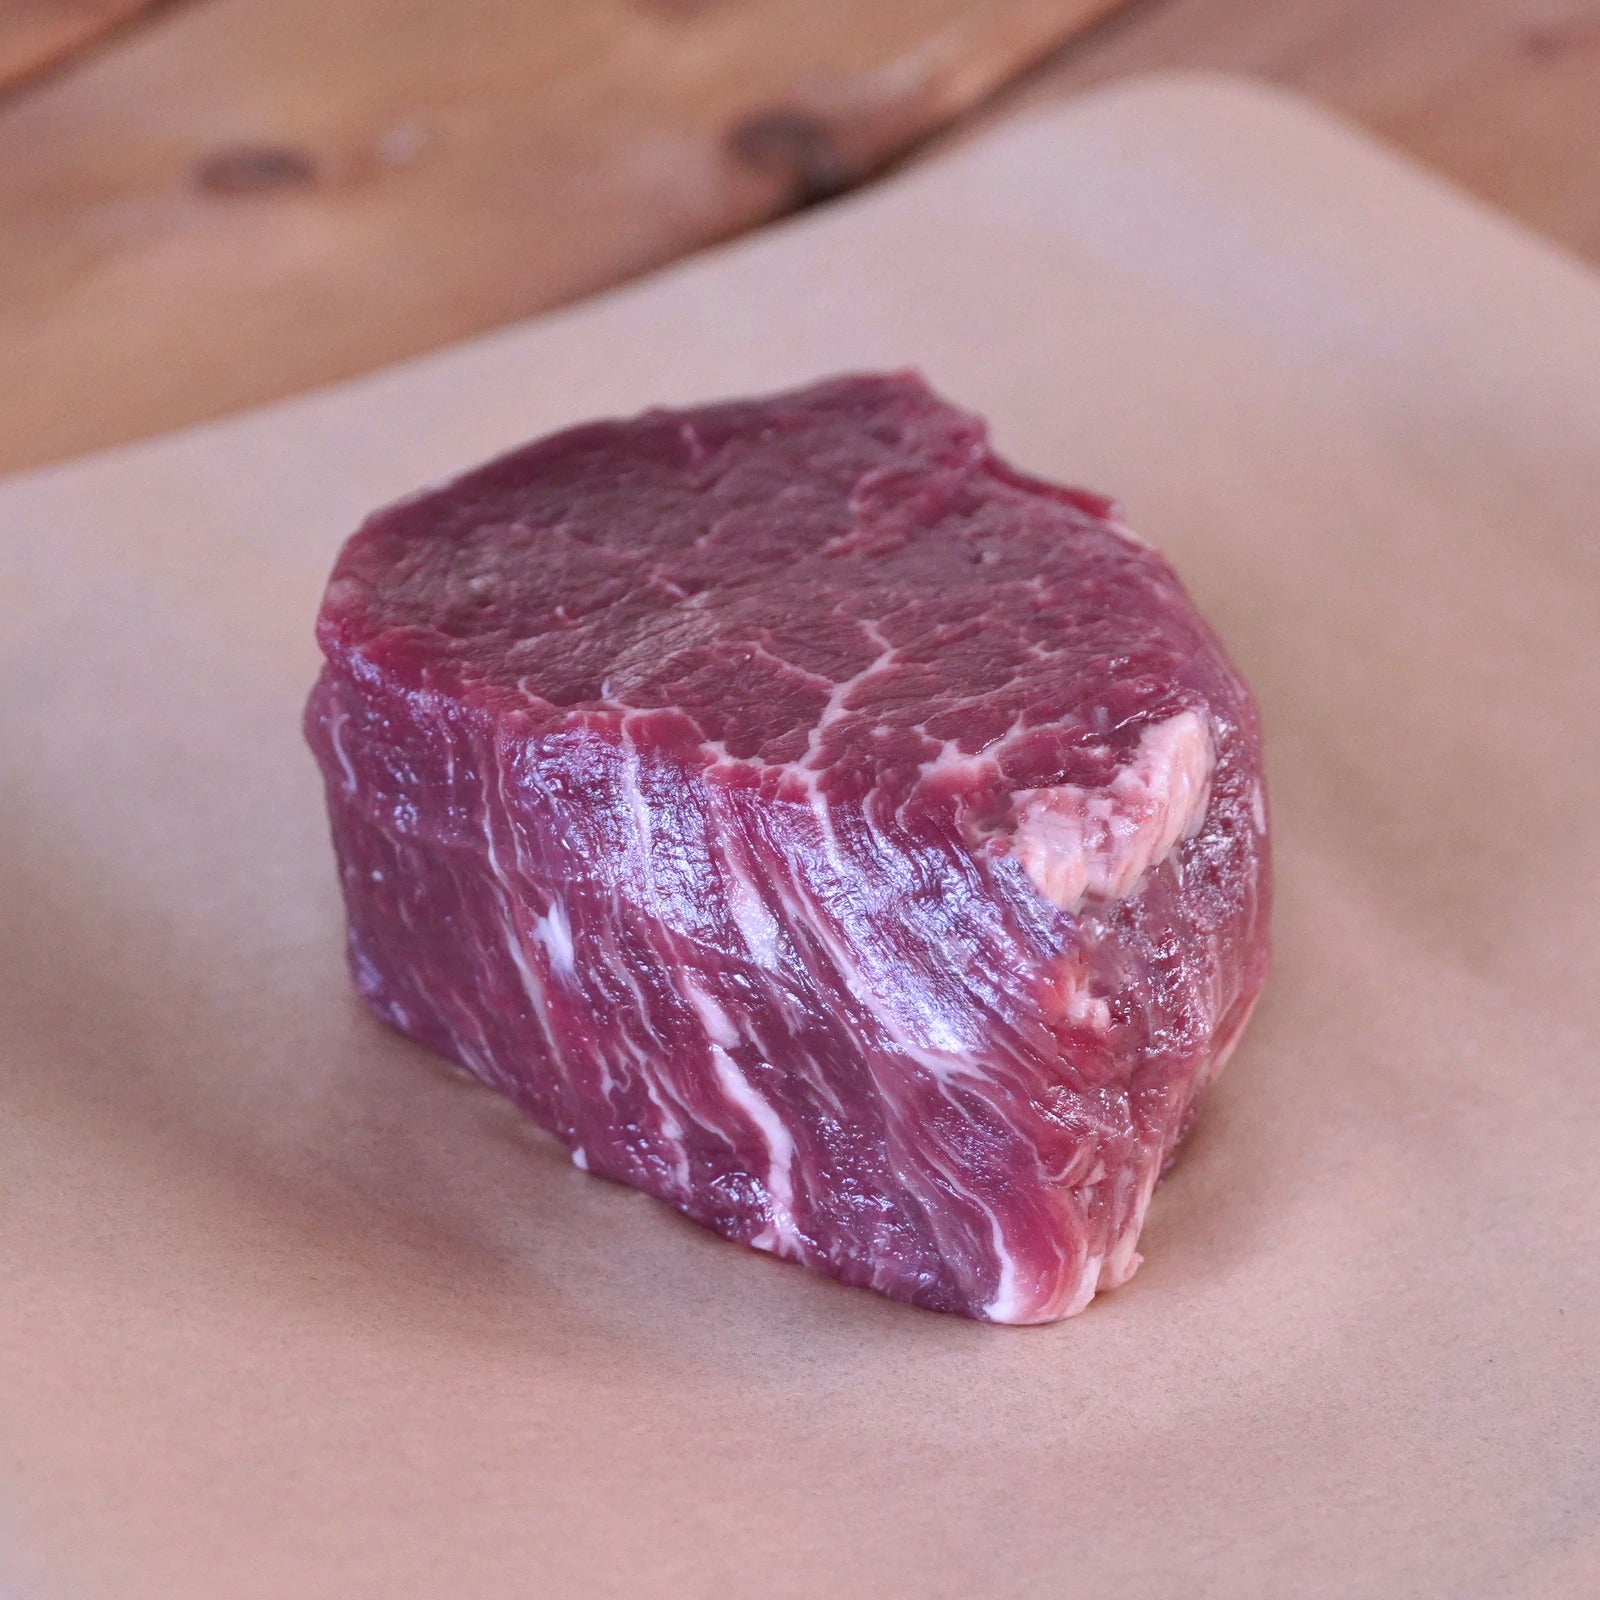 Curated Set of Grass-Fed Beef Steaks (3 Types, 9 Steaks, 1.8kg) - Horizon Farms